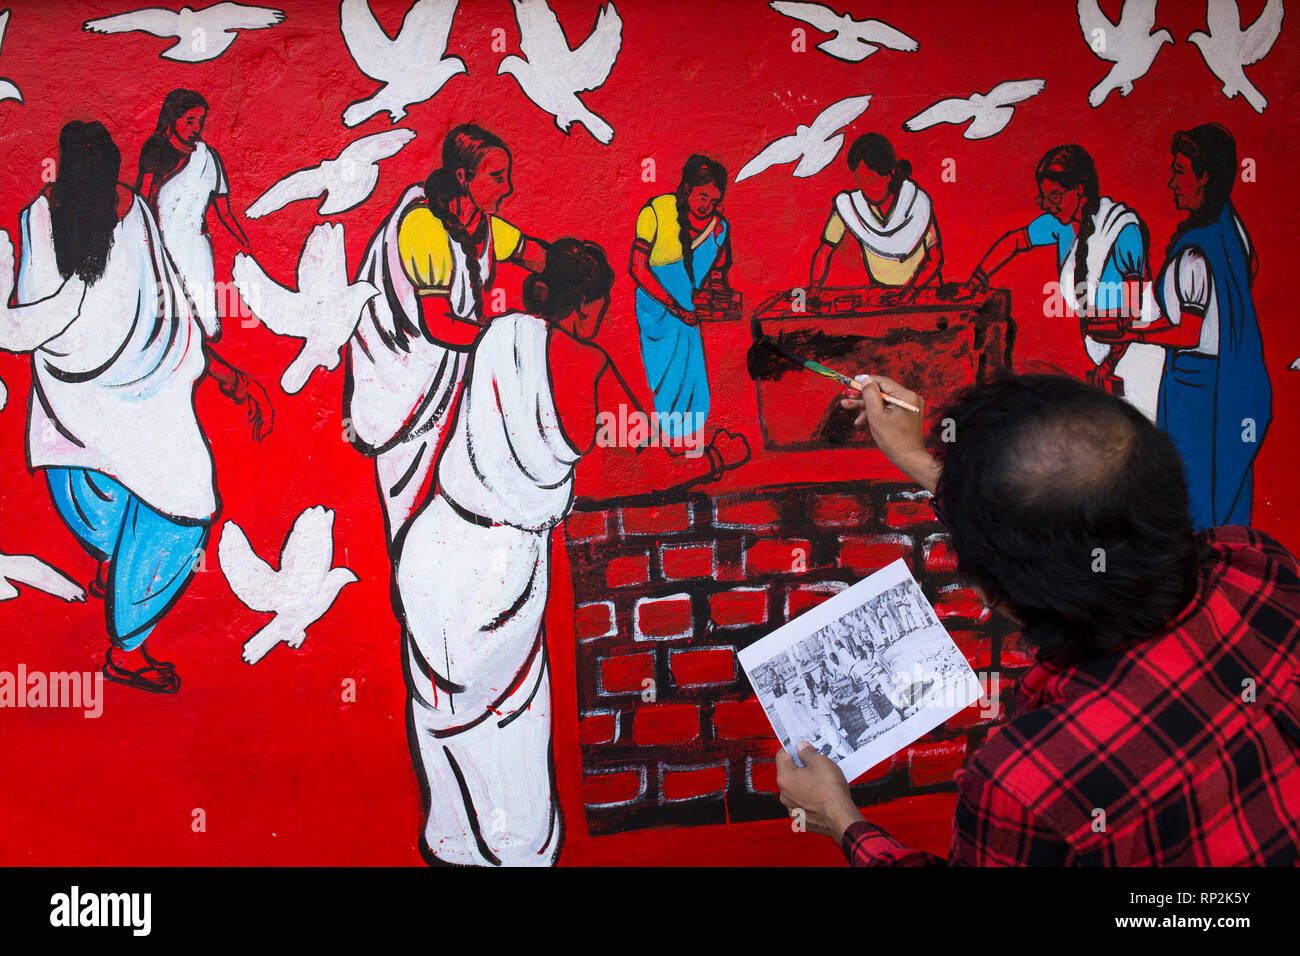 Dhaka, Bangladesh. 20th Feb, 2019.  Bangladeshi students paints on the wall as part of the decoration for the International Mother Language Day celebration in front of the language matyrs monument  in Dhaka, Bangladesh on February 20, 2019.  The nation will pay tribute to the Bangla language movement martyrs who sacrificed their life for their mother tongue in 1952, while the United Nations Educational Scientific and Cultural Organization (UNESCO) declared 21 February as the International Mother Language Day. Credit: zakir hossain chowdhury zakir/Alamy Live New Stock Photo